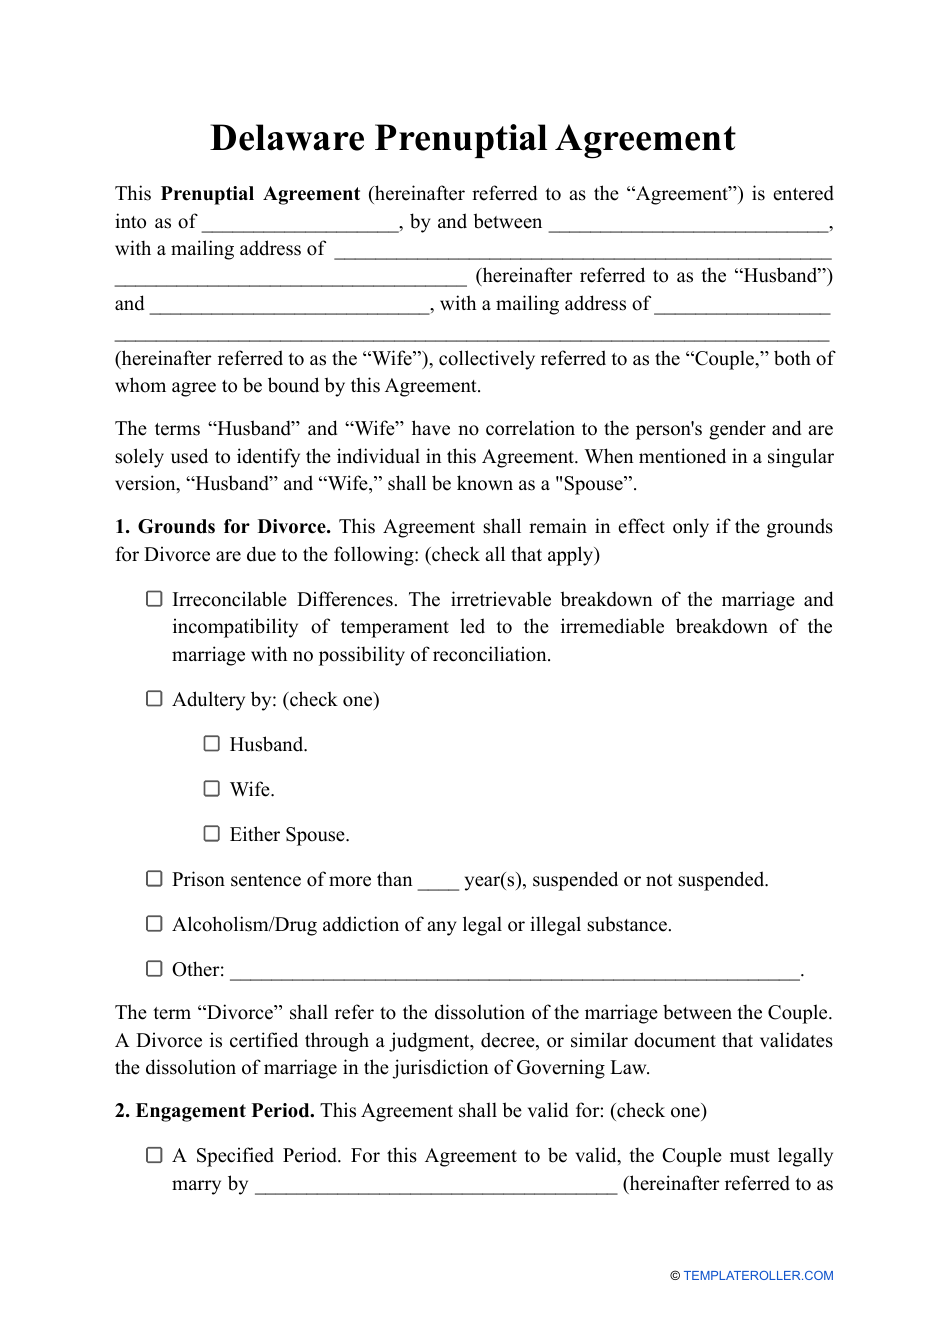 Prenuptial Agreement Template - Delaware, Page 1